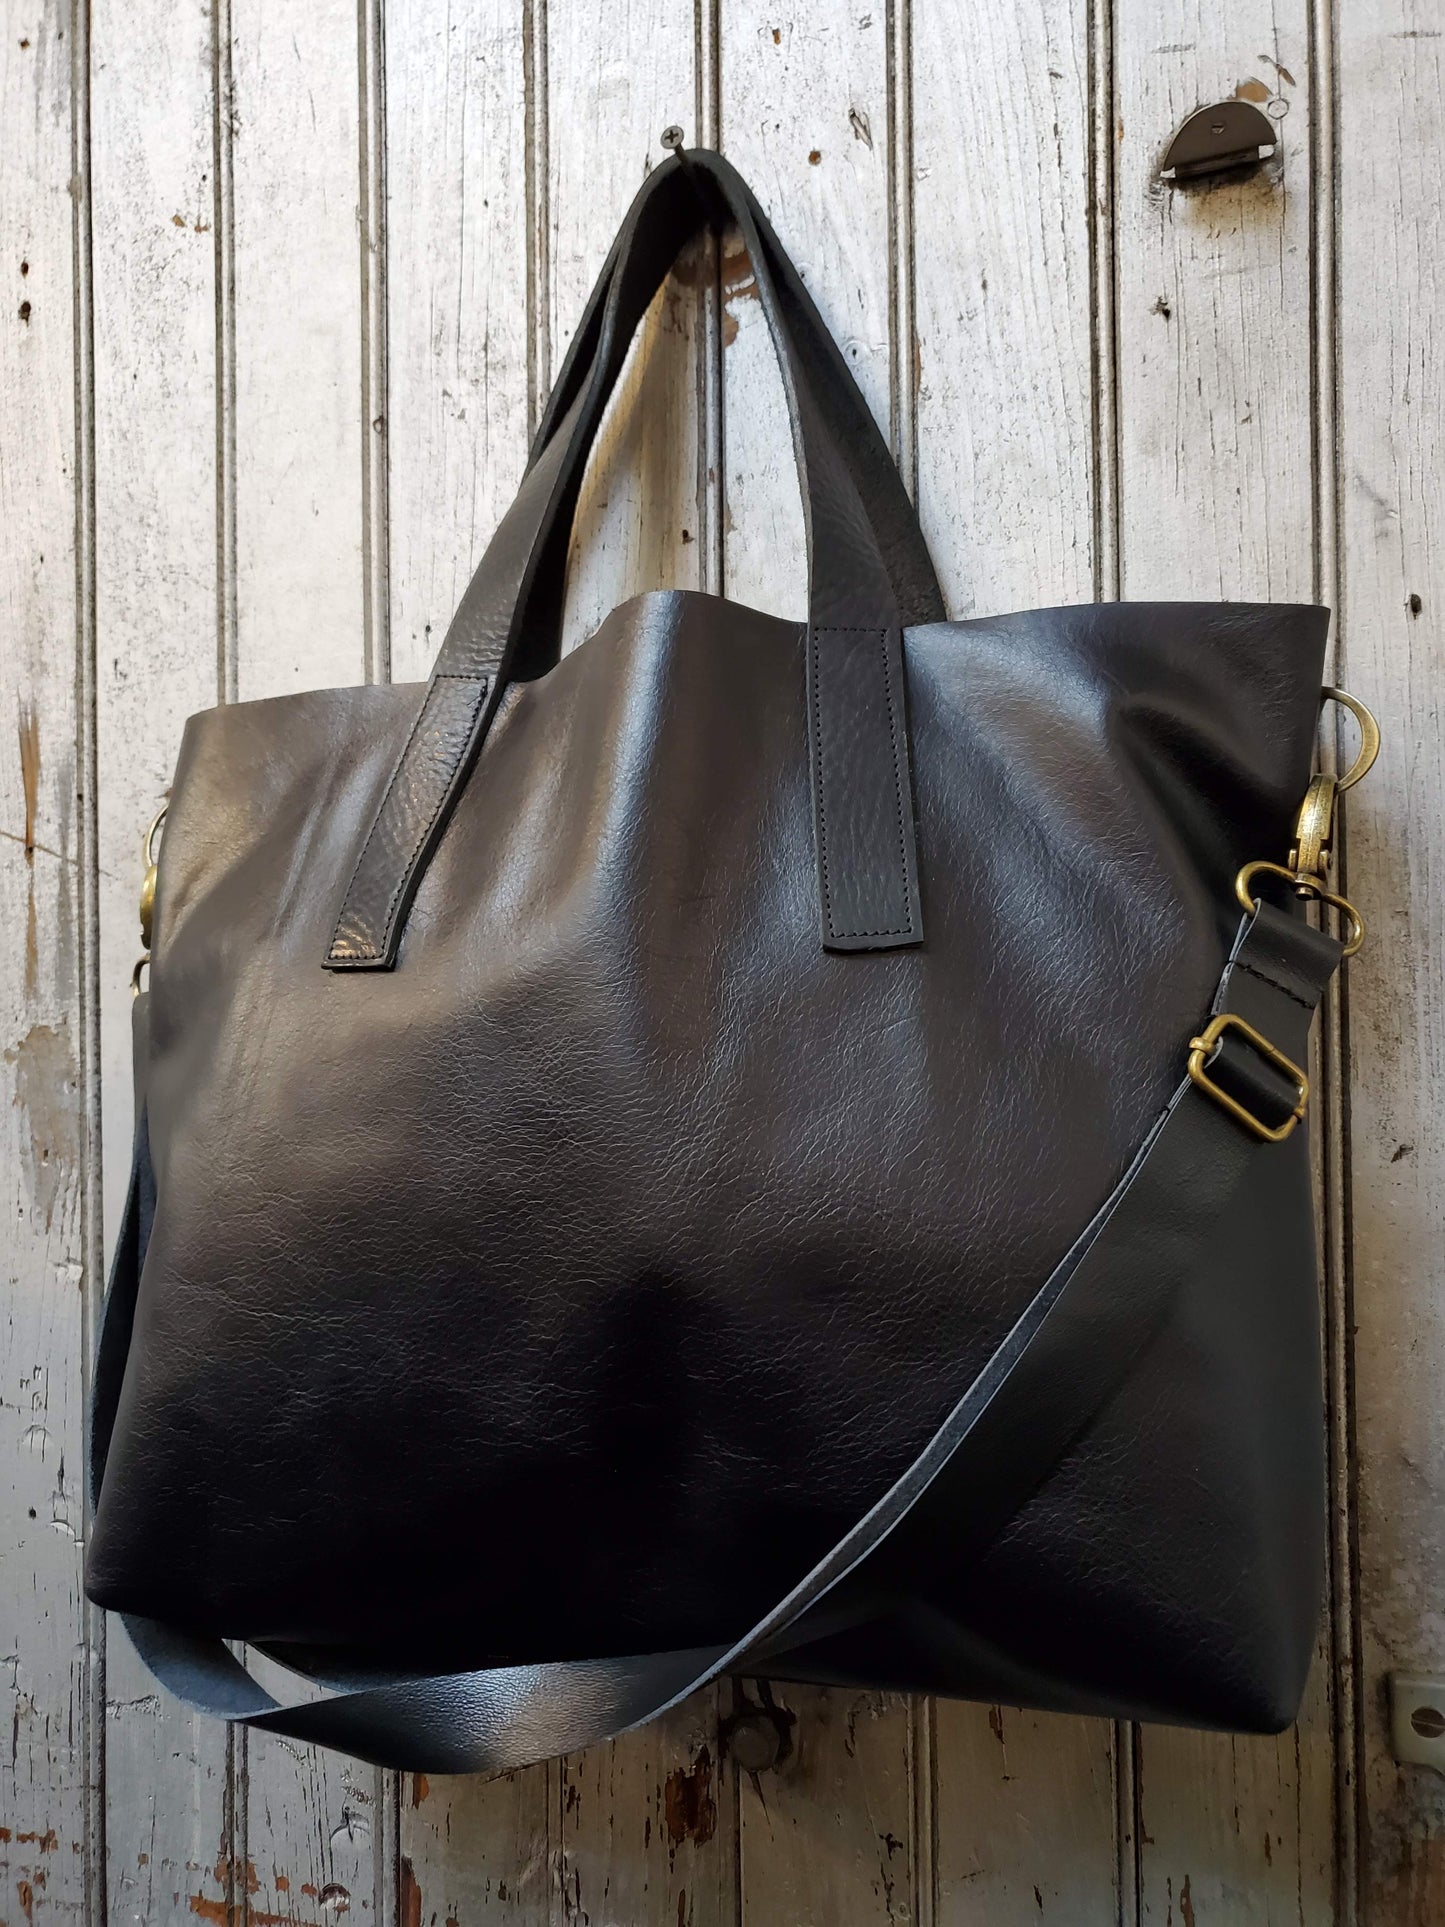 The Chicago Tote - Black Leather